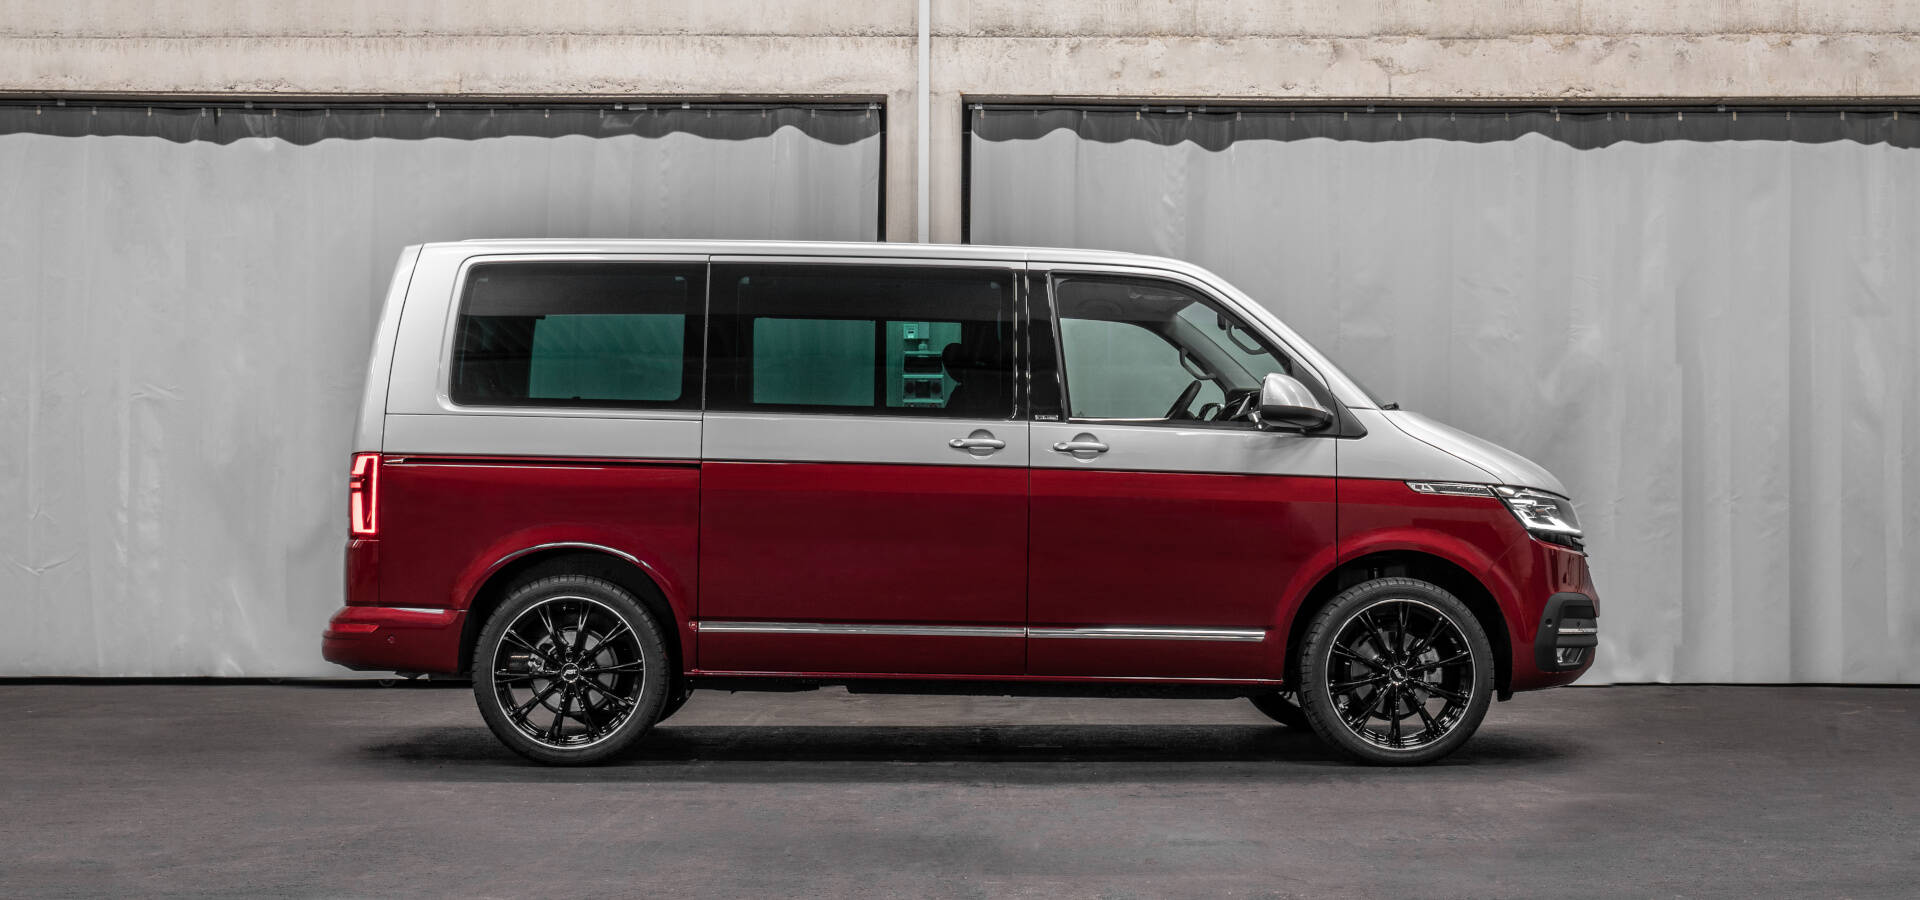 VW T6.1 – fully loaded performance - Audi Tuning, VW Tuning, Chiptuning von  ABT Sportsline.